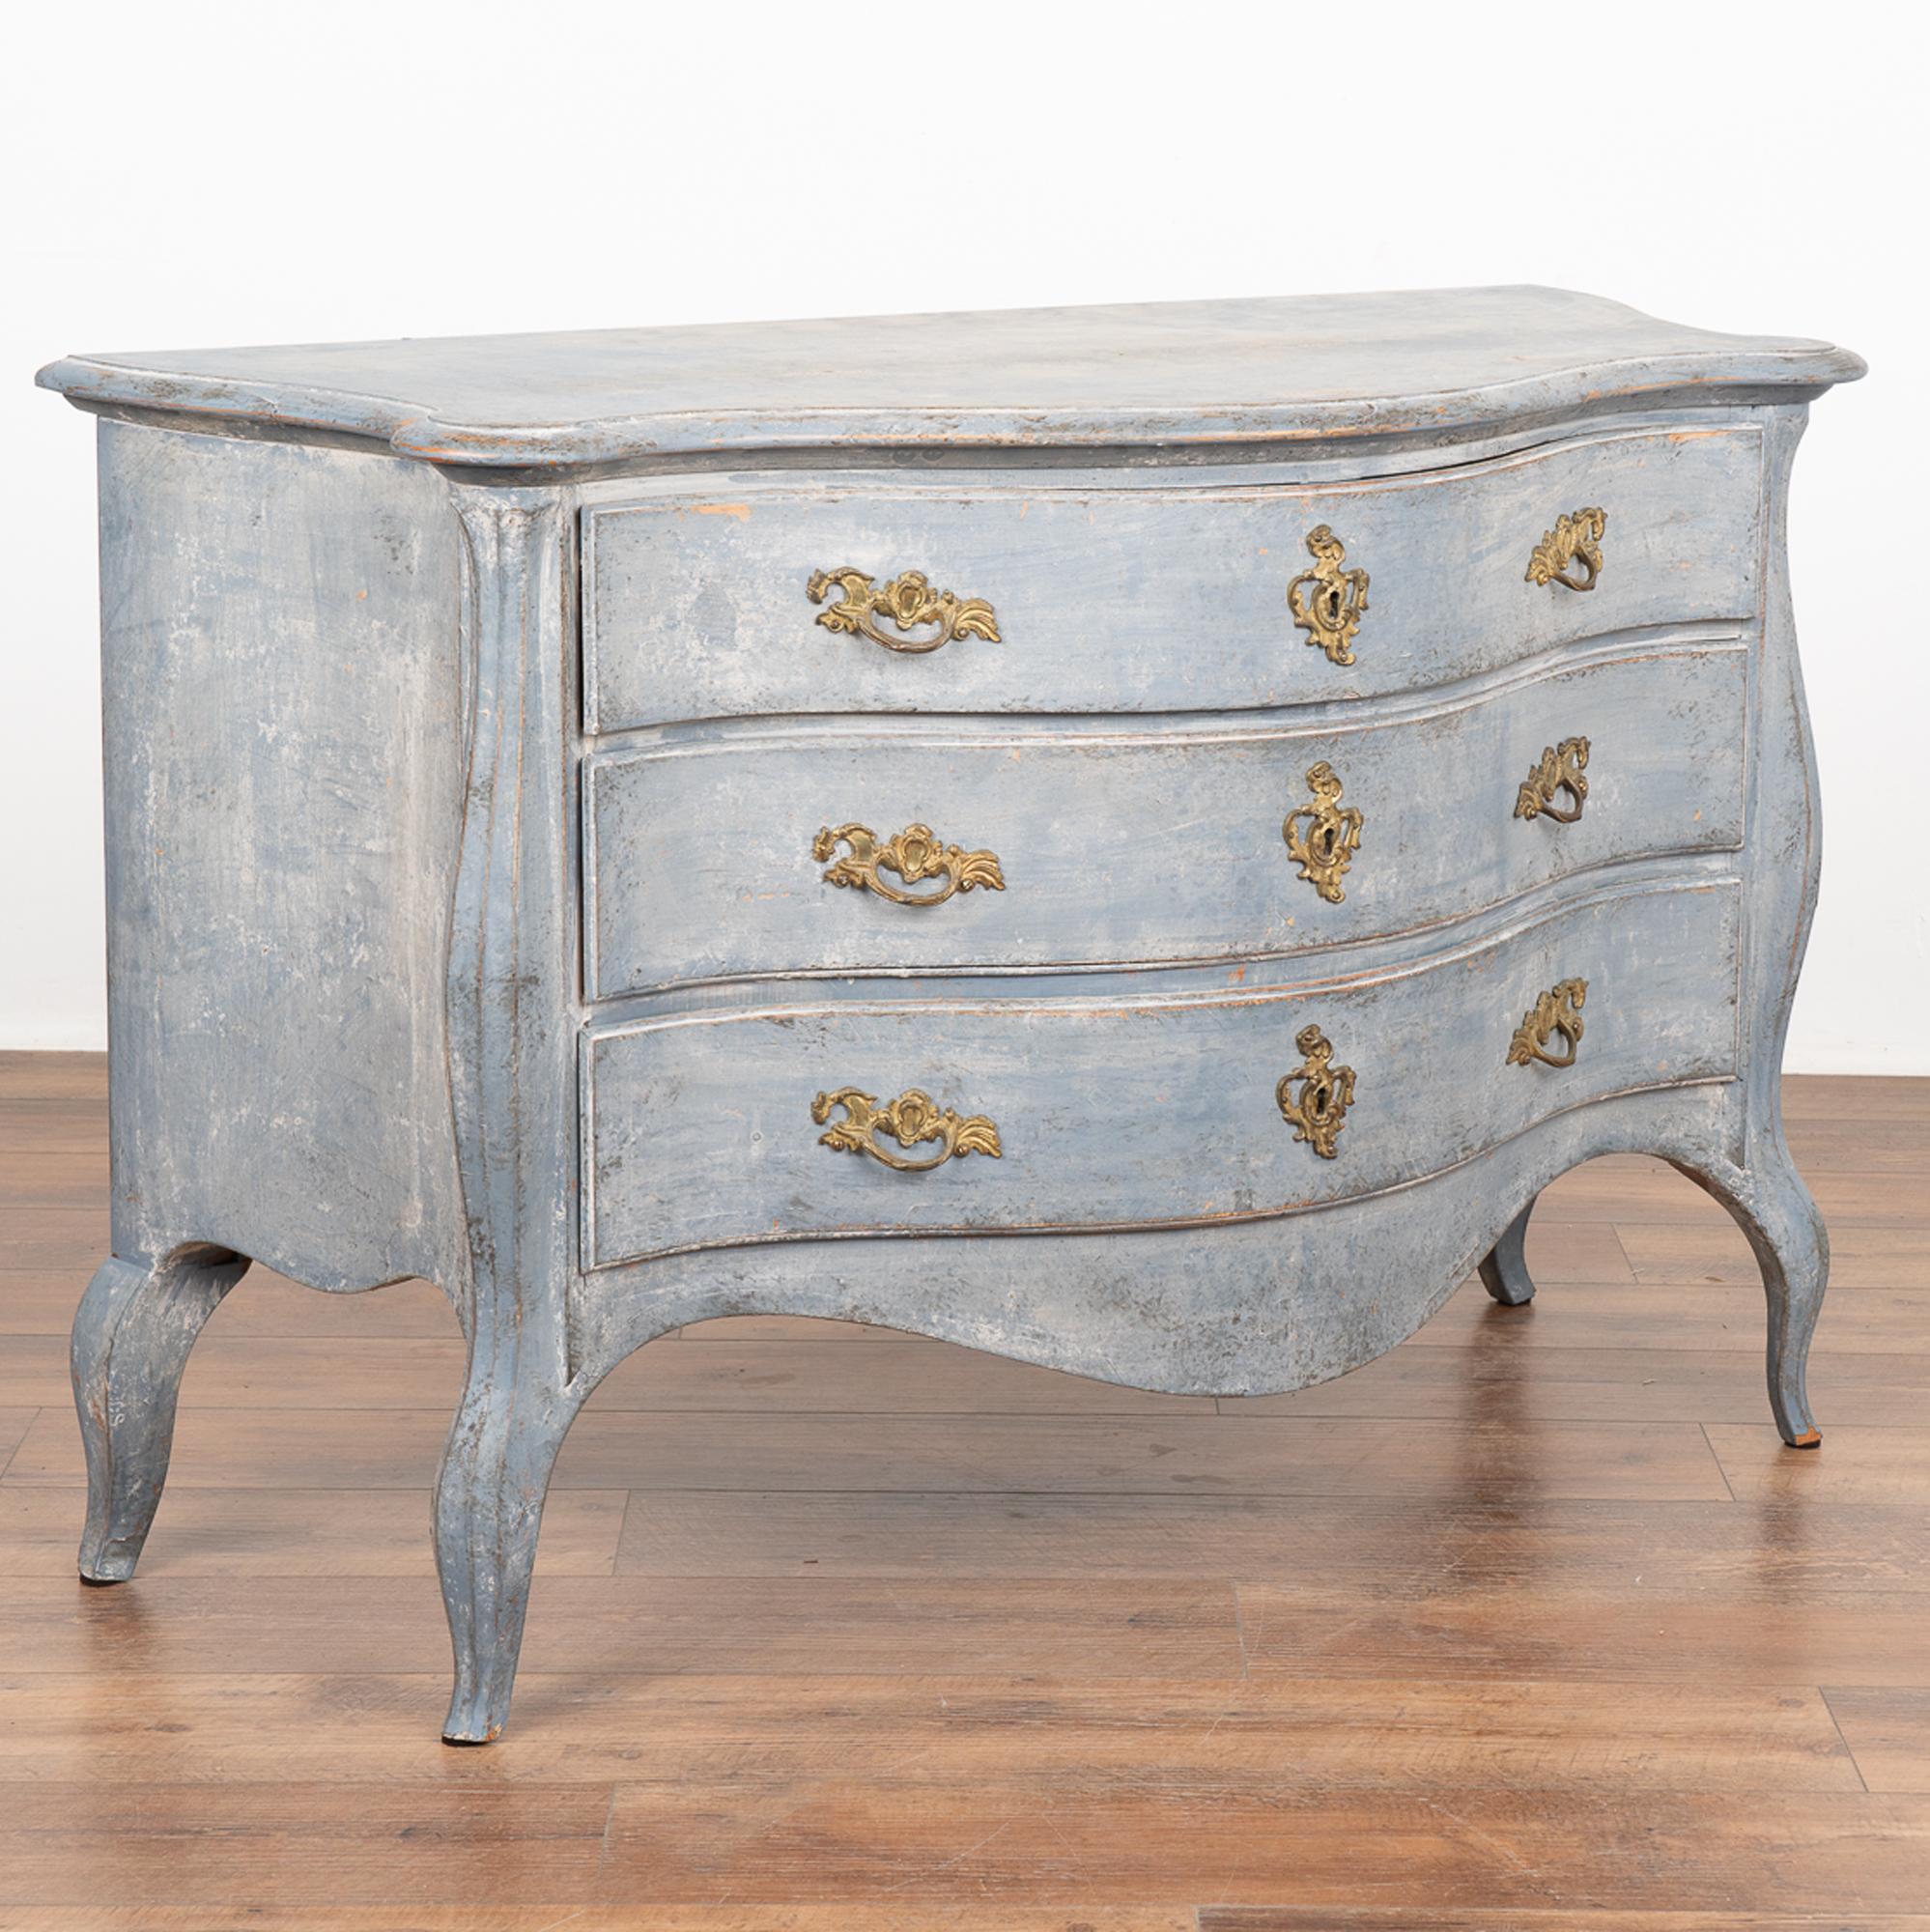 The soft blue painted finish is captivating in this attractive chest with three serpentine front drawers raised on curved cabriolet feet.
Restored, later professionally painted in layered shades of blue with white undertones and lightly distressed